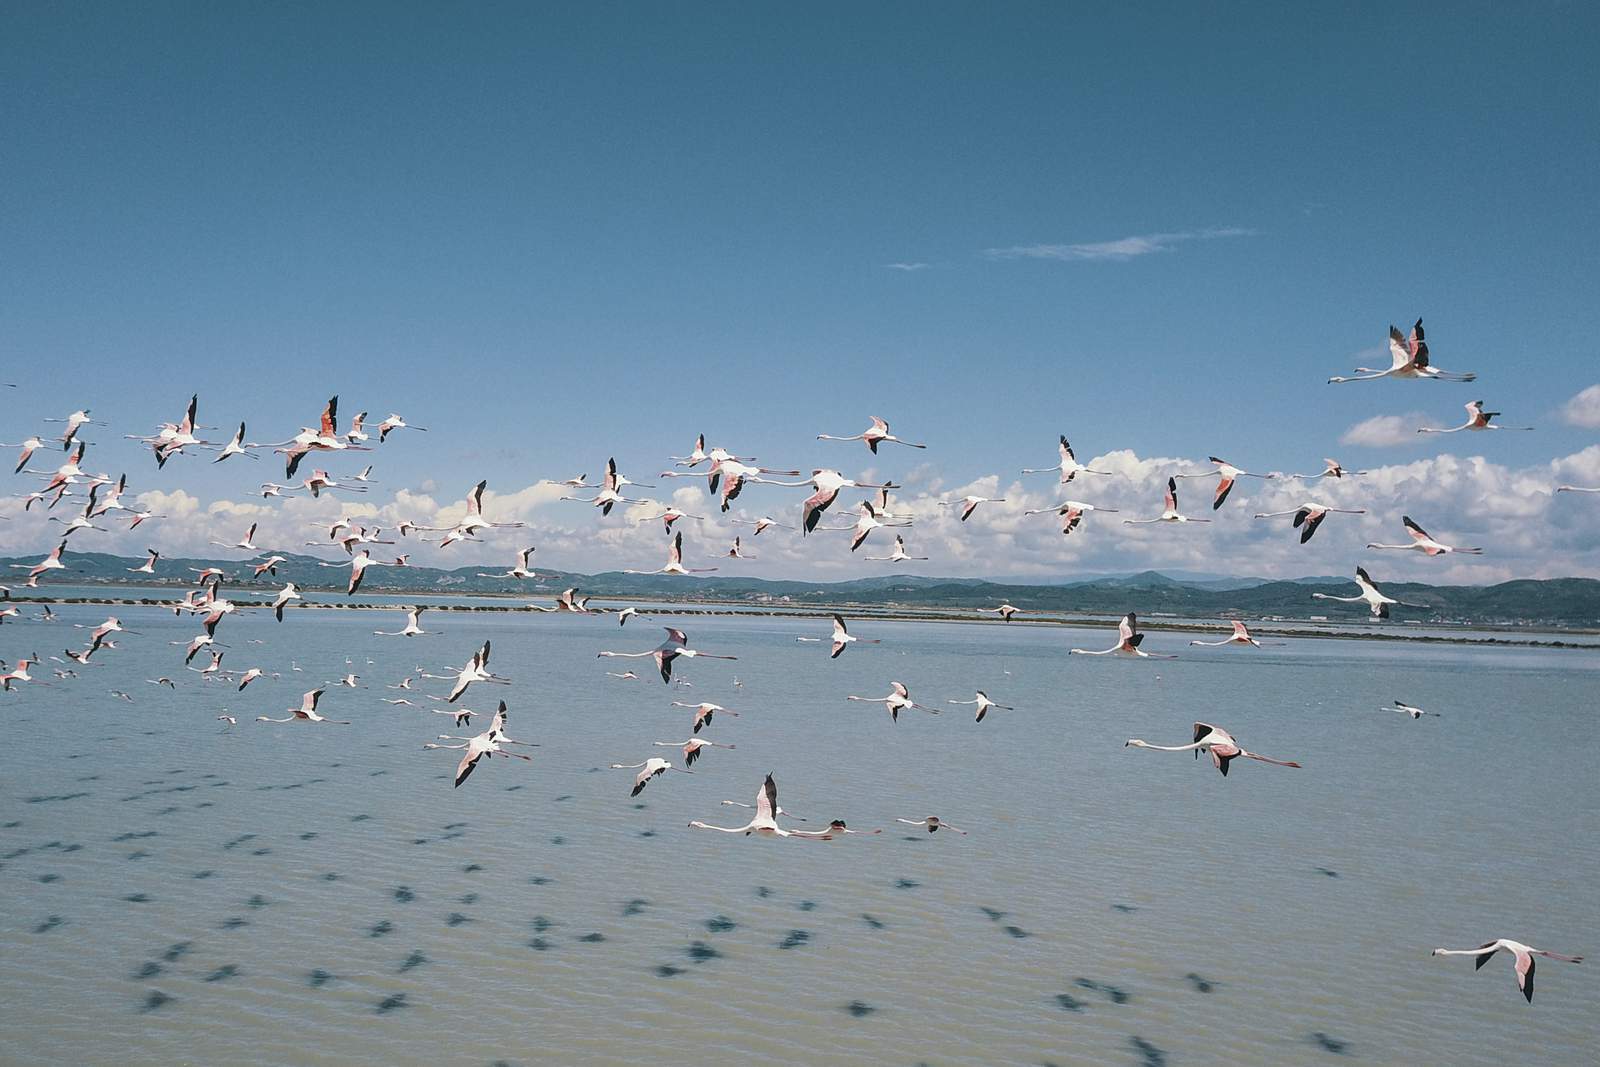 Conservationists: new airport gravely harms Albania wetland